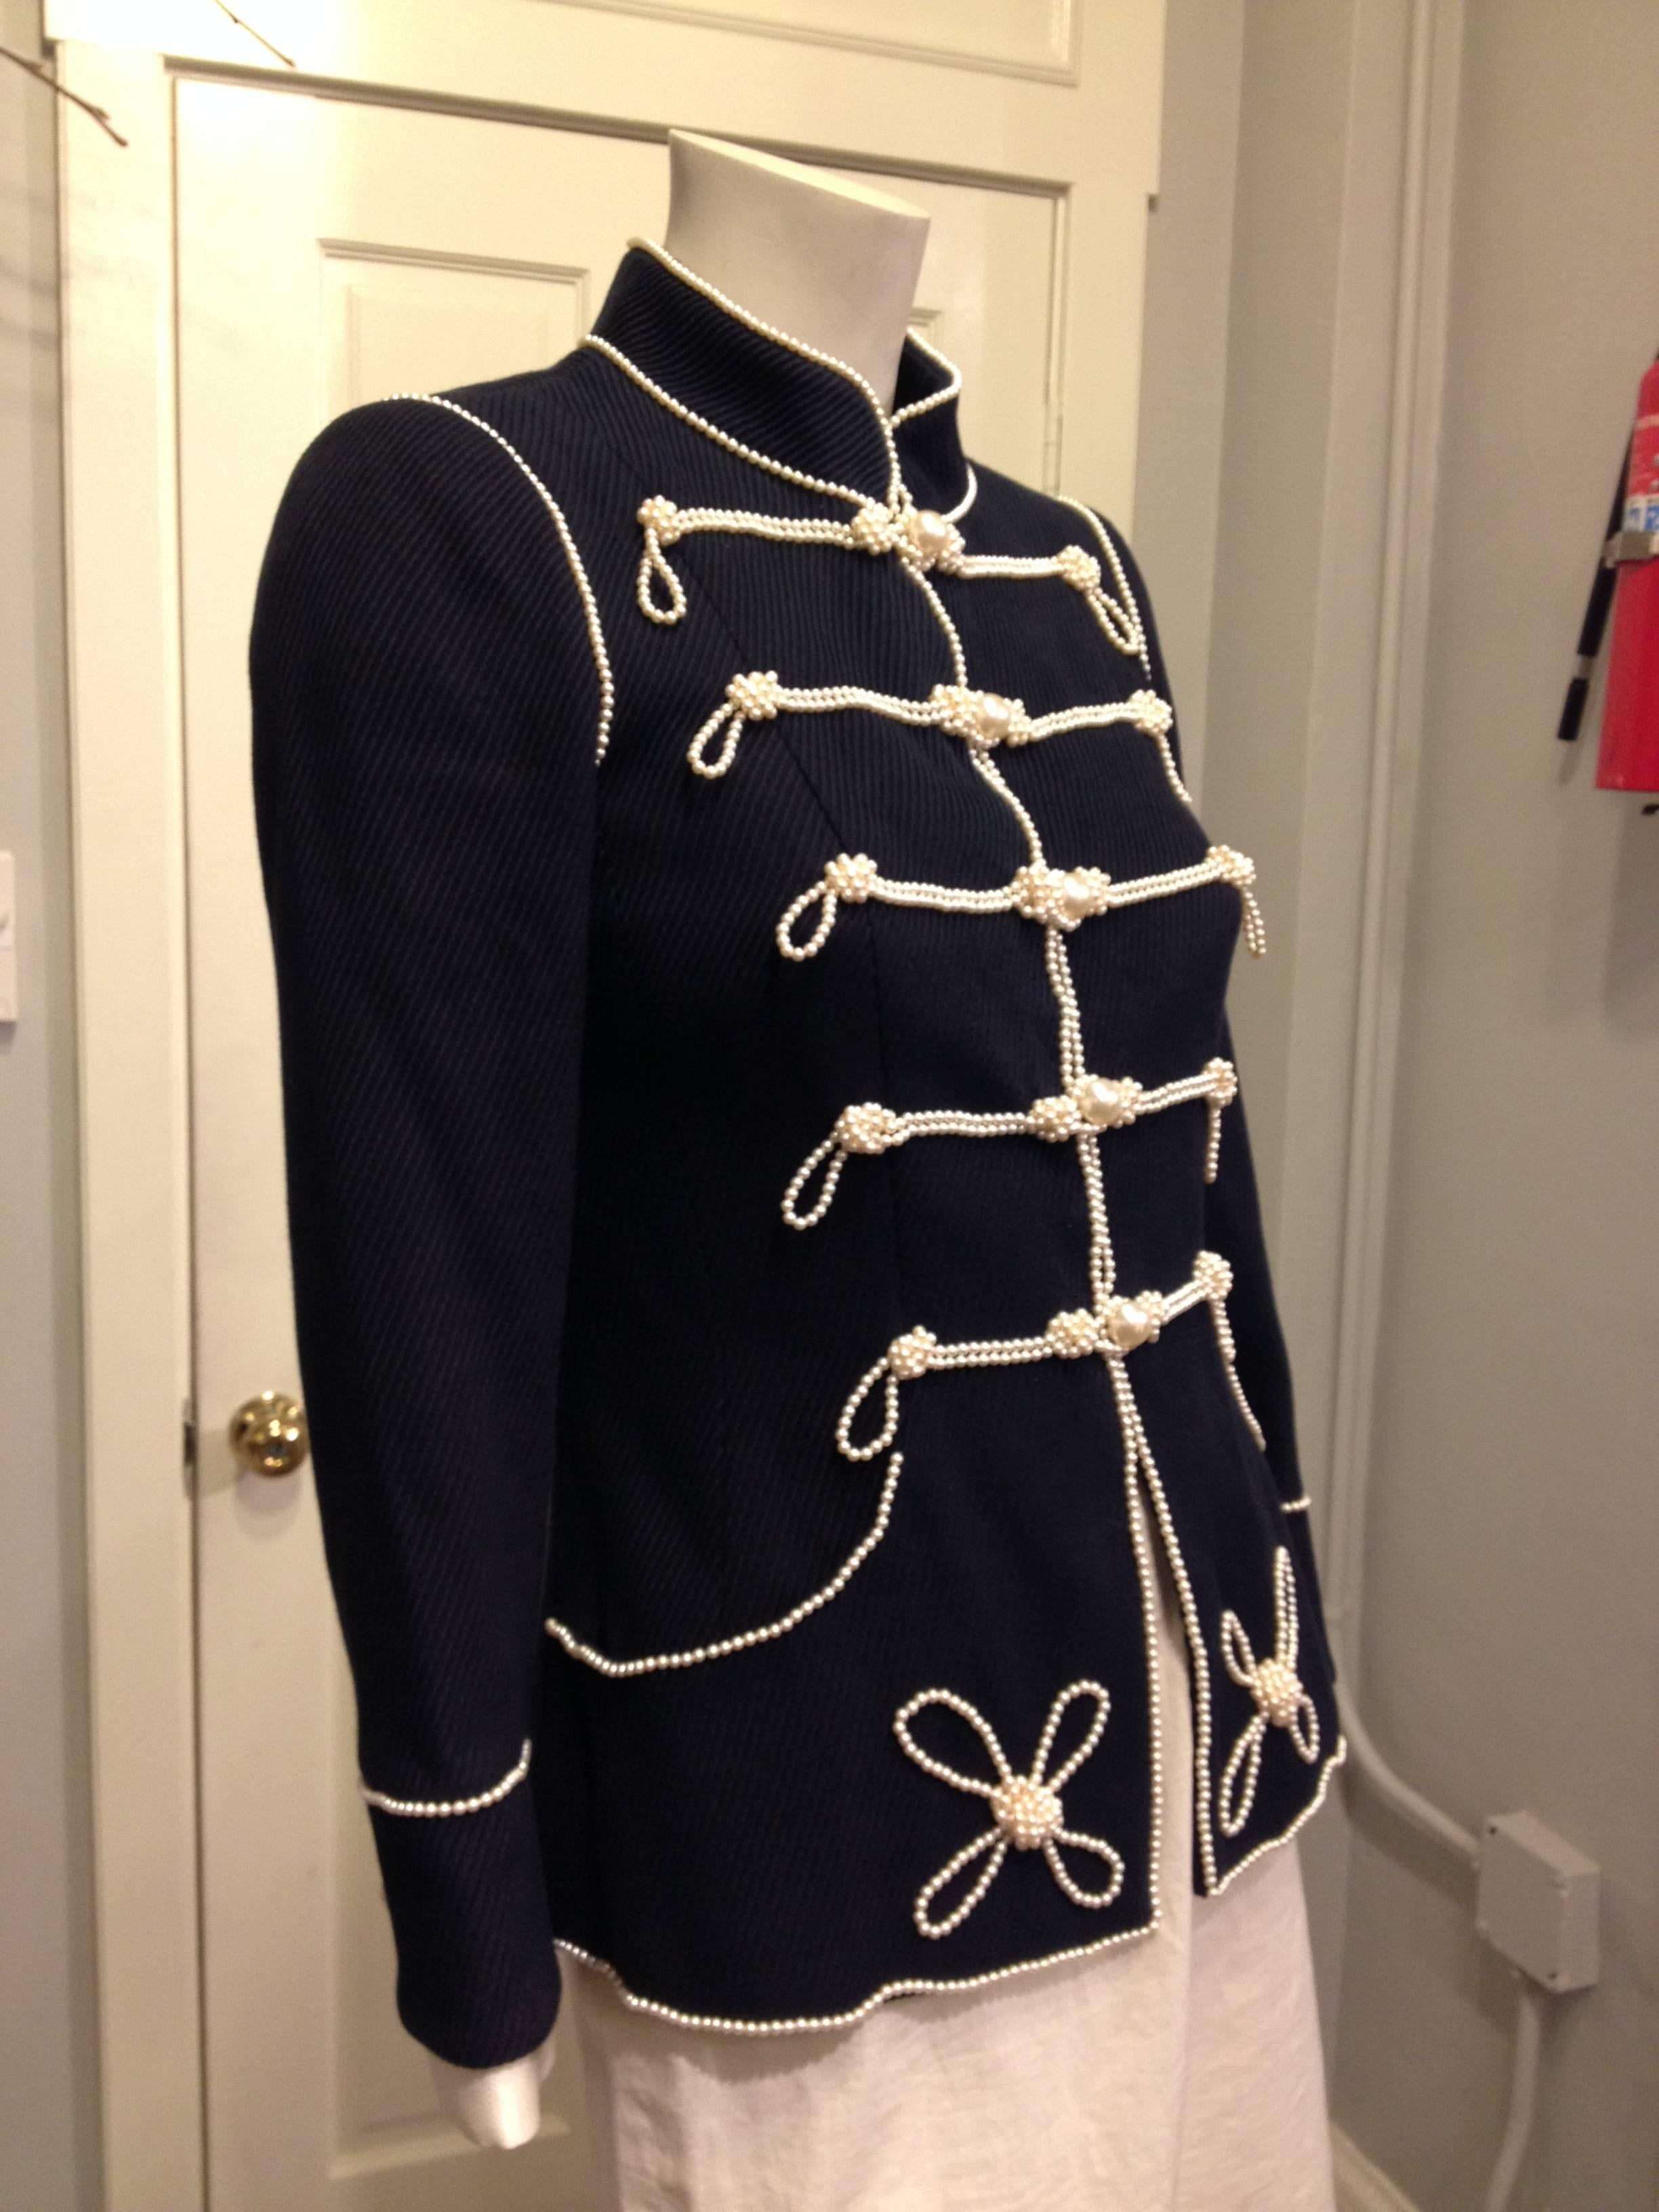 Chanel does Sgt. Pepper! This piece is an absolute show-stopper - the deep navy woven material is cut sharp with a high collar and nipped-in waist, and trimmed with a plethora of iconic Chanel pearl strands that style the piece like a marching band